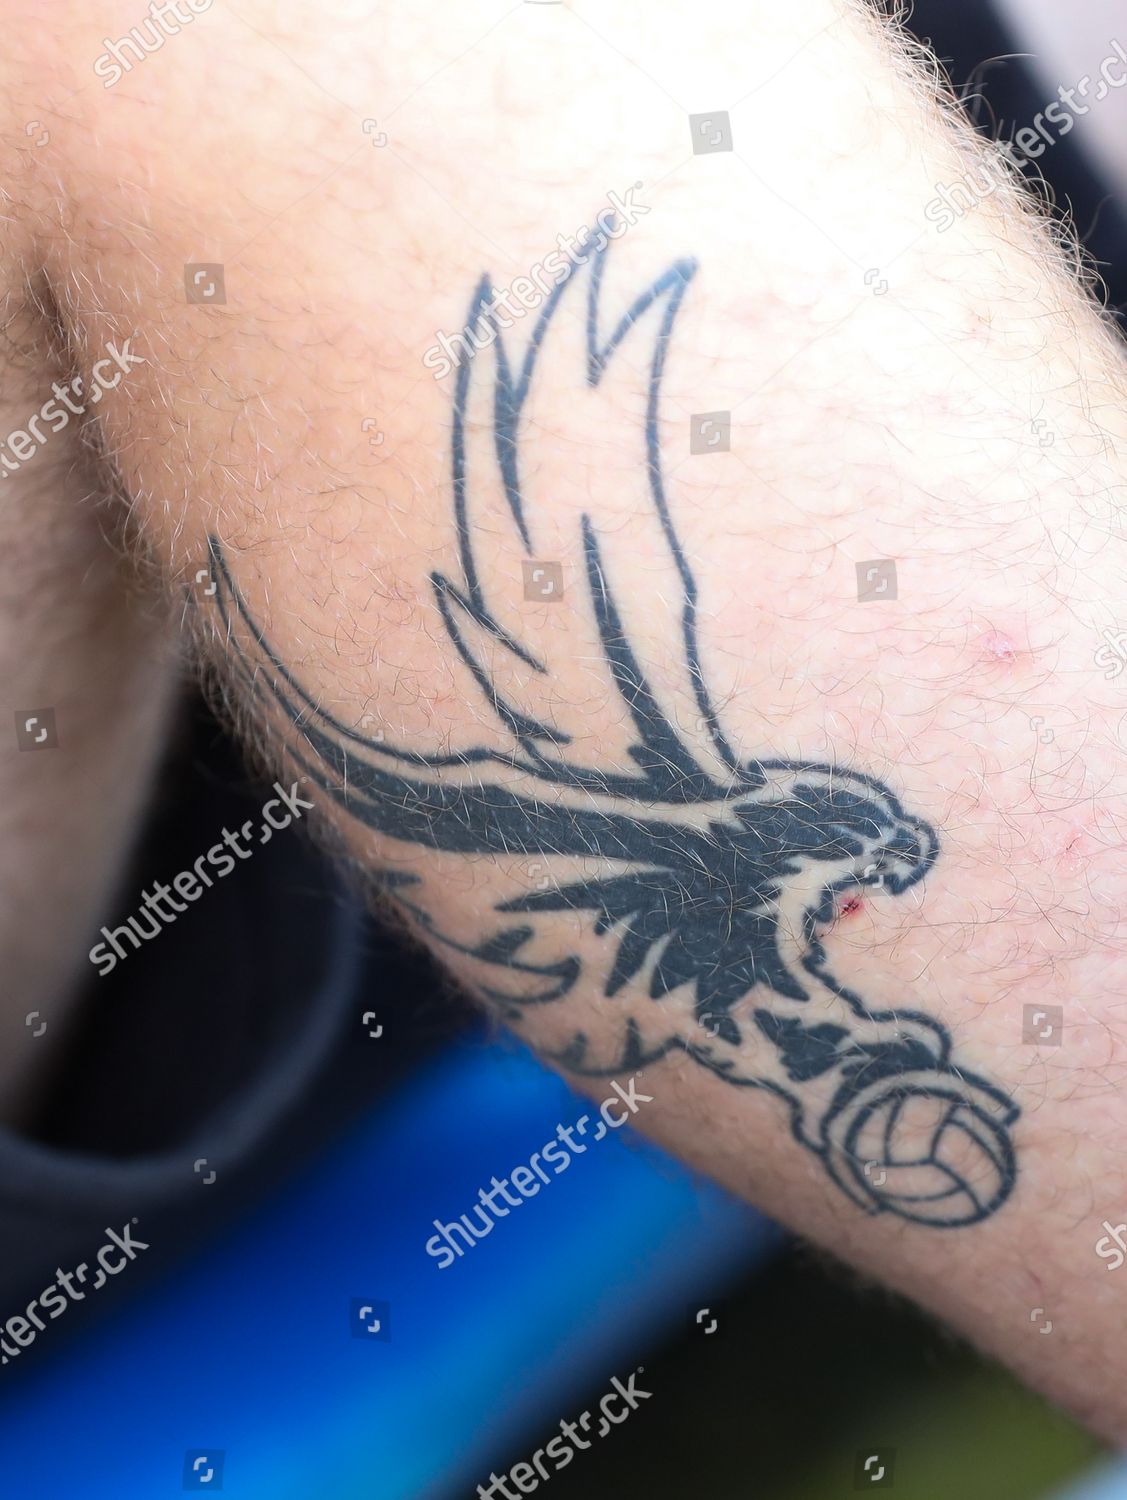 Palace Supporters Eagle Tattoo Editorial Stock Photo  Stock Image   Shutterstock